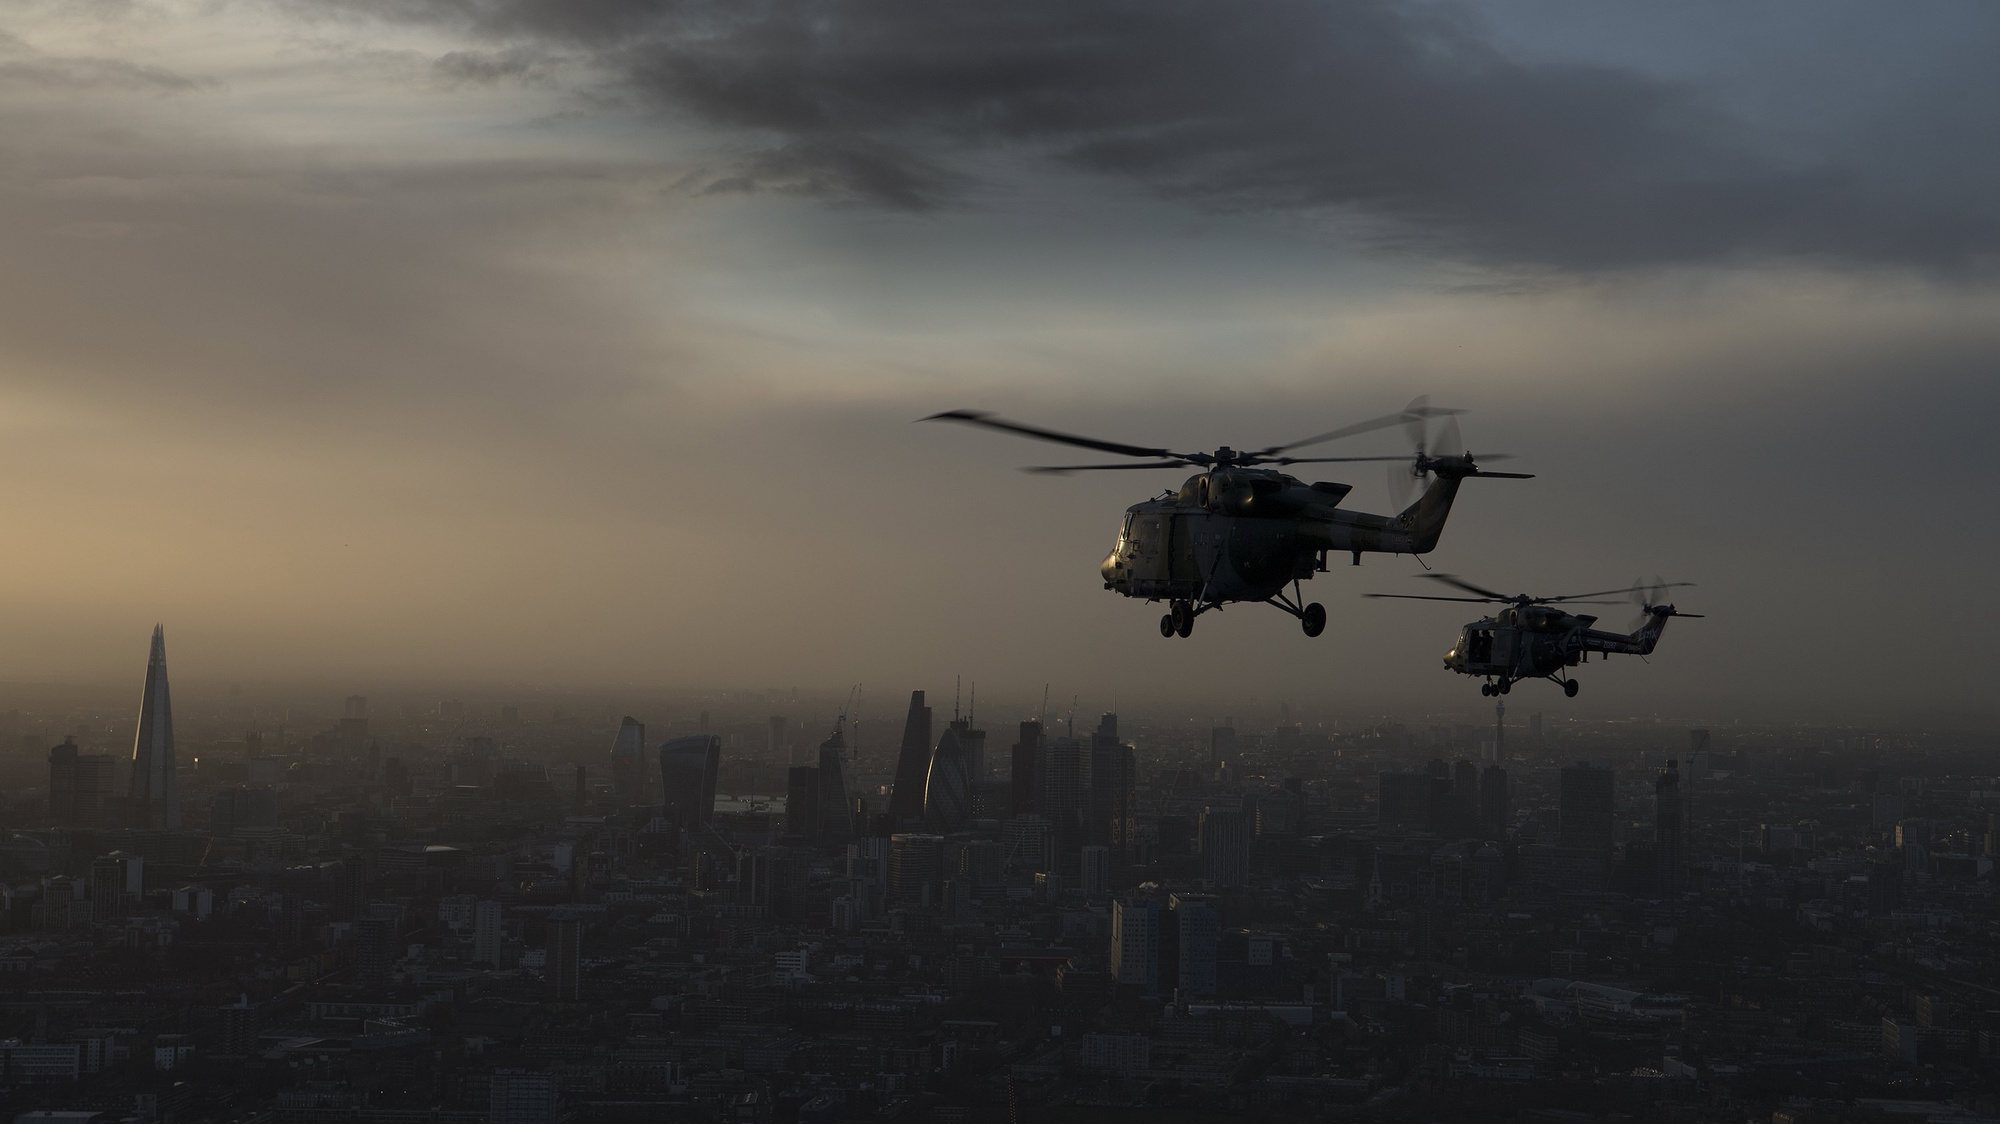 epa06444090 A handout photo made available by th British Ministry of Defence (MOD) showing two British Army Lynx helicopters on their last flight flying at sunset over London, Britain, 16 January 2018. The MOD stated that the Army paid special tribute as one of its most ubiquitous aviation assets bows out of service. The Lynx helicopter has had a long and distinguished career with the British Army stretching back nearly 40 years. Described as a primary battlefield utility helicopter, the venerable Lynx entered service back in 1978 and since then has been used to: destroy tanks, evacuate the wounded, gather intelligence, provide humanitarian support, rescue those in peril, and much more besides. It’s seen service across the globe from the freezing plains of Northern Canada to the dust bowls of the Middle East and has supported British troops on active service in Bosnia, Kuwait and Afghanistan.However, age has finally caught up with the Lynx and although it’ll be a tough act to follow, Wildcat will replace the Lynx. With its superior avionics uprated engines and improved capability it too will prove a formidable force over any battlefield of the future. To mark the Lynx’s decommissioning from British Army service, the Army Air Corps flew five of the last remaining airframes from RAF Odiham in Hampshire, where they are based, on a commemorative tour around England taking in some of the sites and locations to which the aircraft is most fondly associated: Middle Wallop, Upavon, Yeovil, Wattisham to name a few. The flight culminated in an impressive V5 ‘air procession’ along the length of the River Thames over Central London.  EPA/Corporal Mark Larner / BRITISH MINISTRY OF DEFENCE /  HANDOUT MANDATORY CREDIT: Corporal Mark Larner (MOD): CROWN COPYRIGHT HANDOUT EDITORIAL USE ONLY/NO SALES